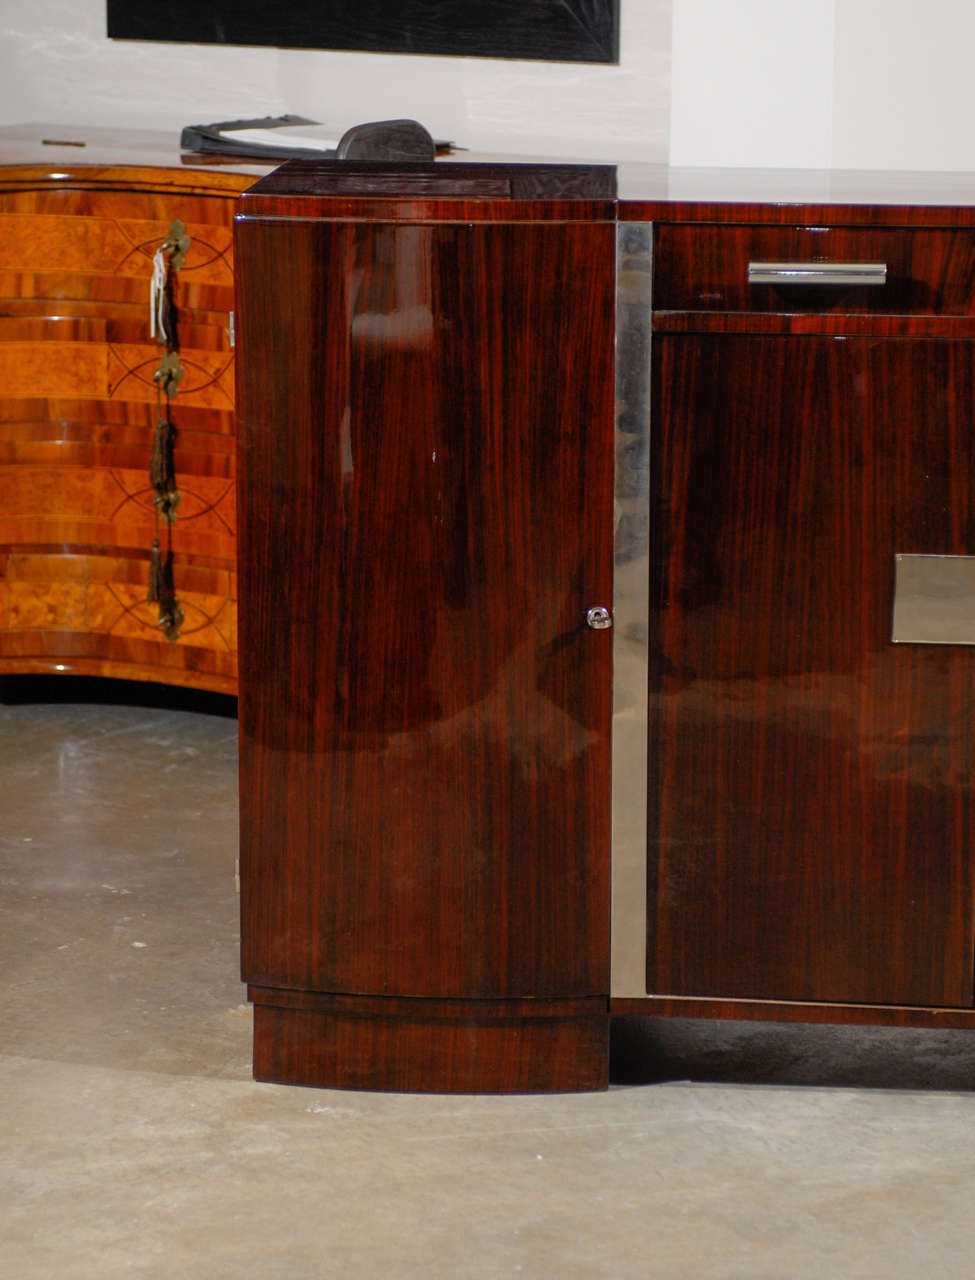 20th Century French Art Deco Style Sideboard with Palisander Wood and Chrome Accents